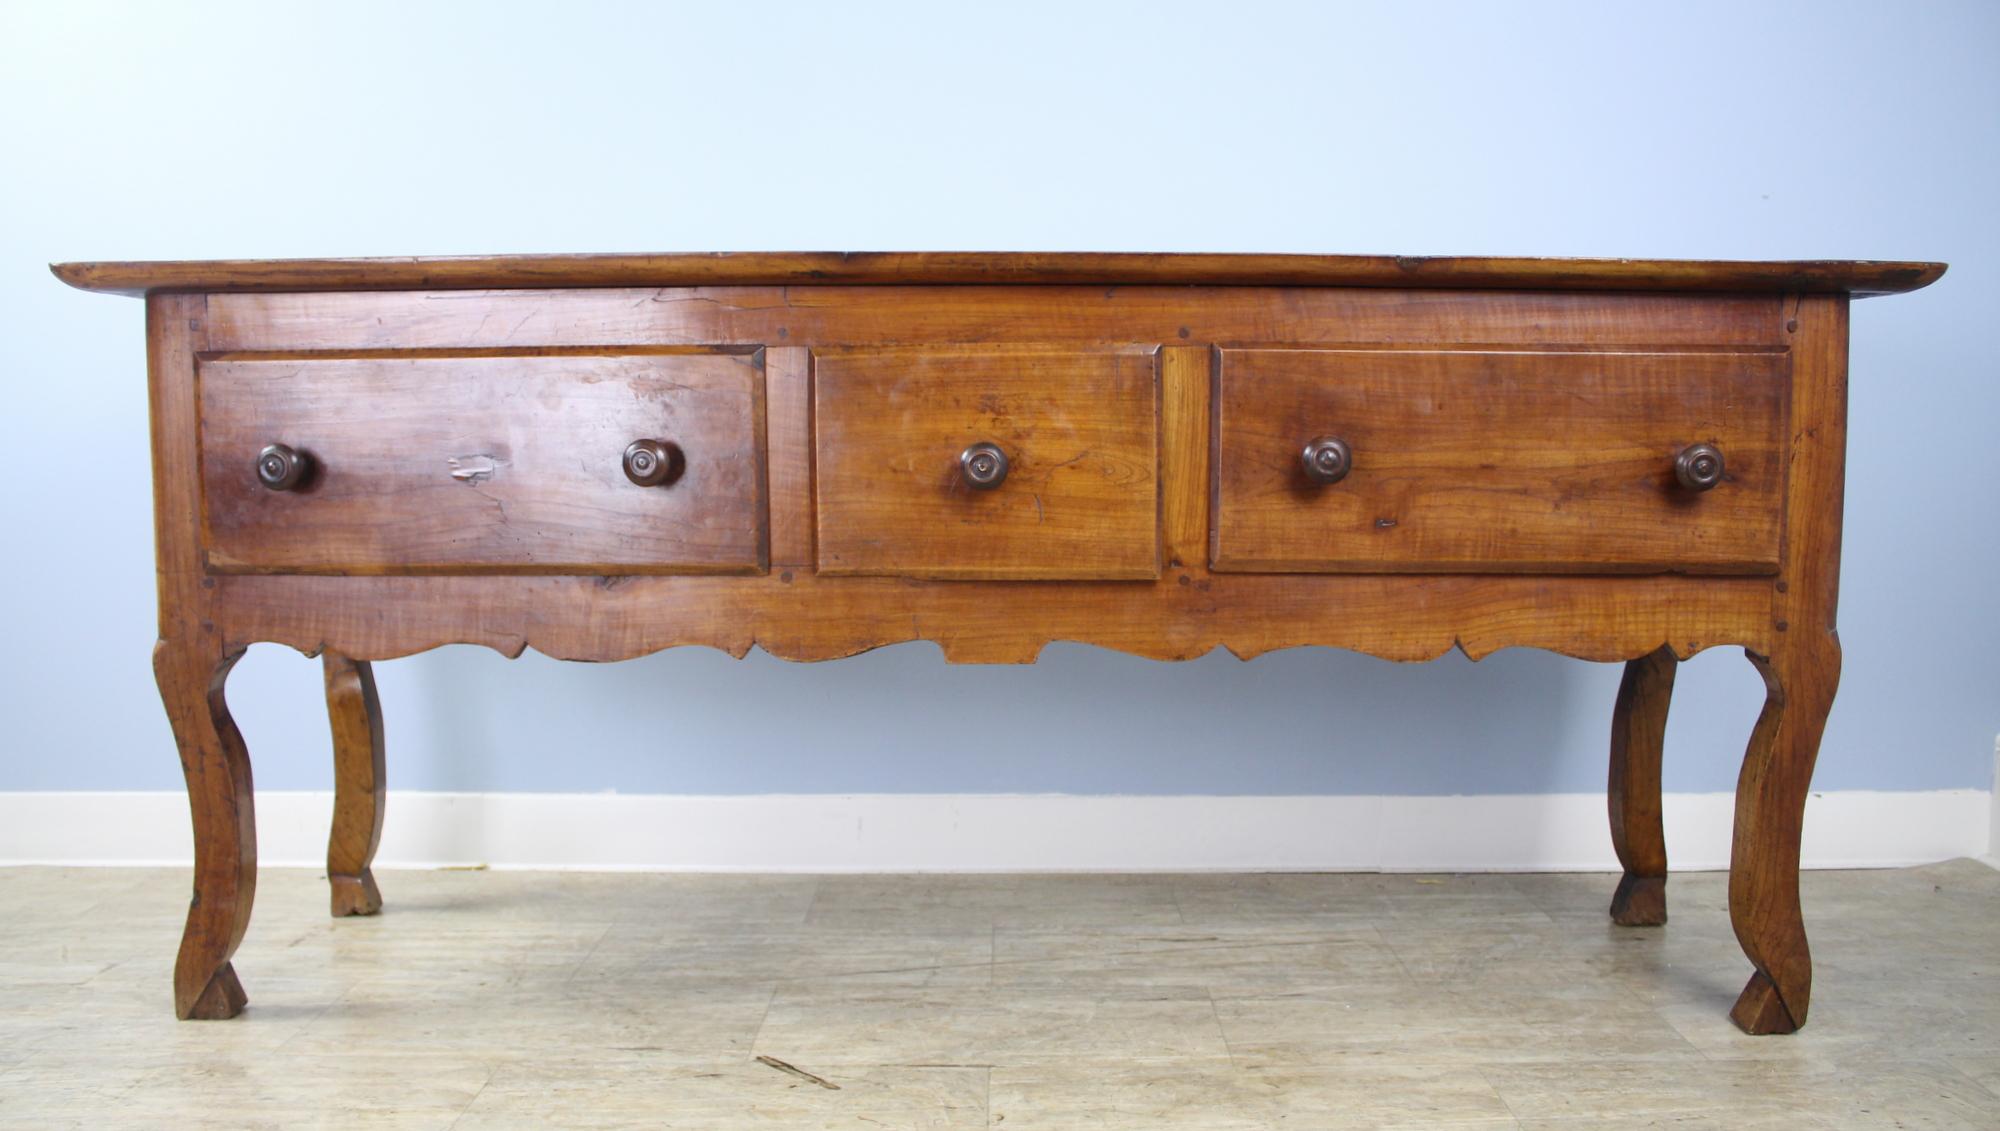 A stylish server or sideboard with three deep drawers, and a lovely carved apron. Nice depth the allow space for passing through or pushing back one's dining chair. Graceful cabriole legs and hoof feet complete the look.  The back side of this